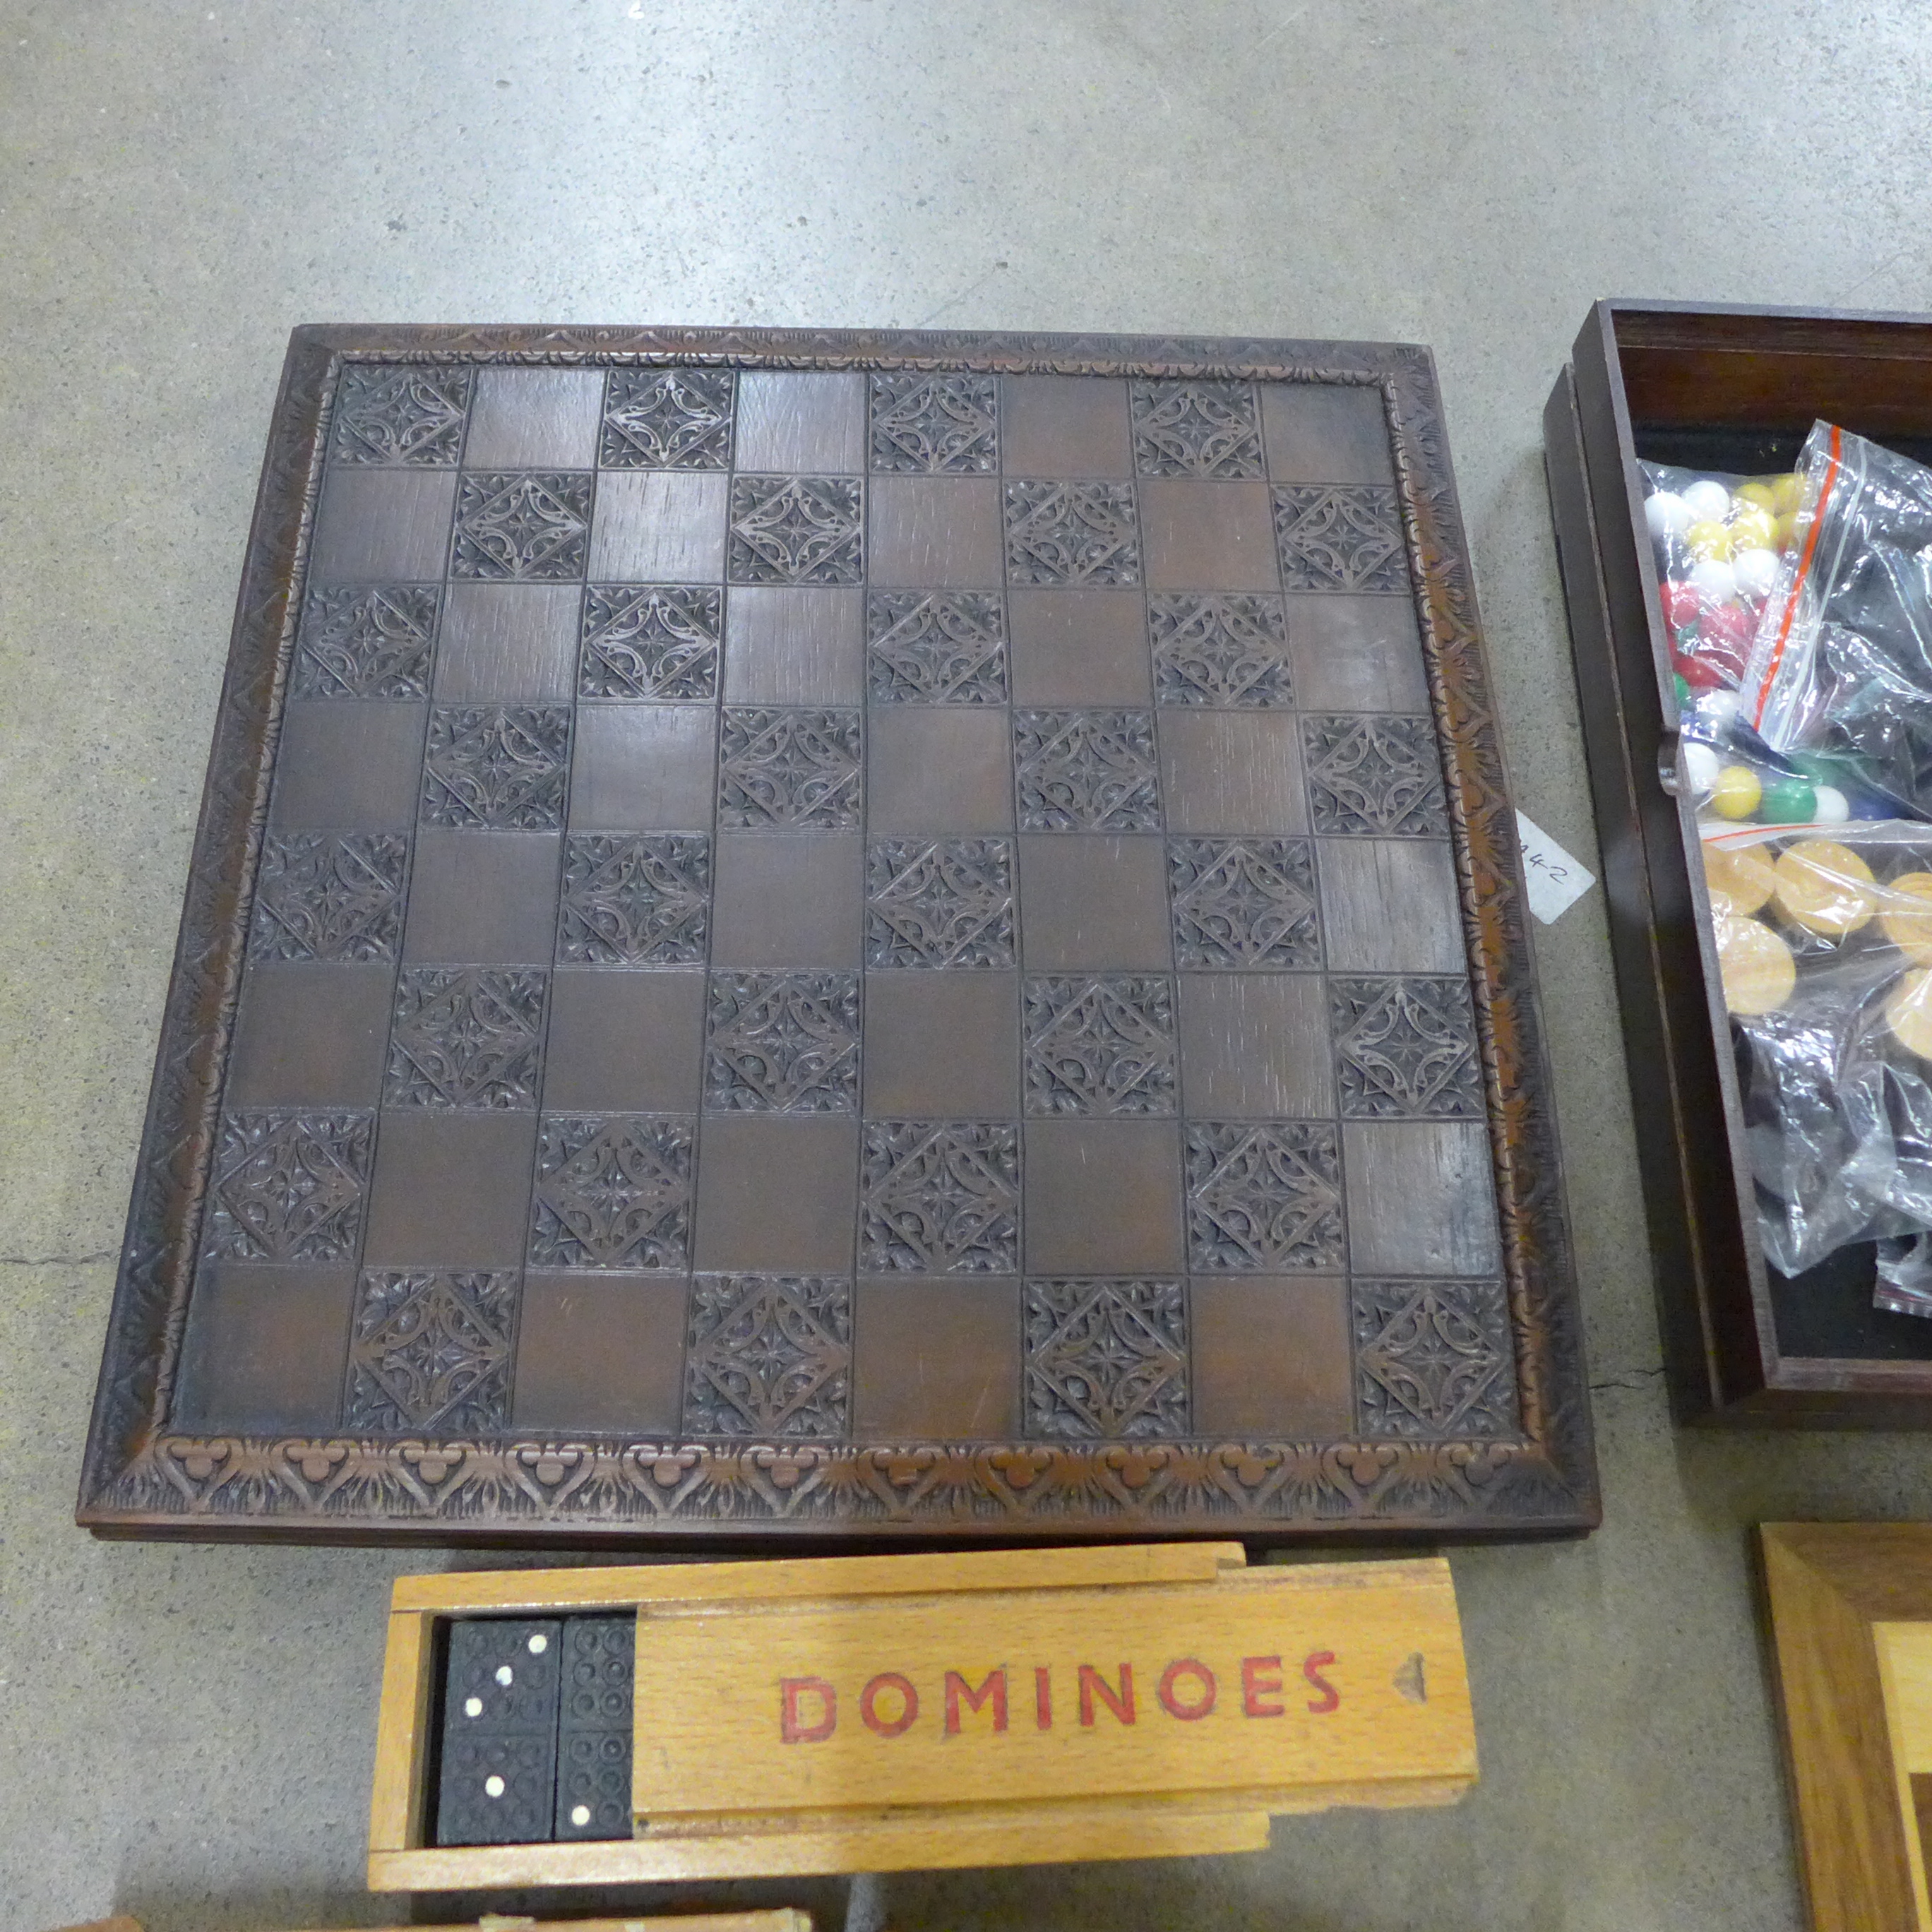 A collection of board games including chess sets, dominoes and playing cards - Image 2 of 5